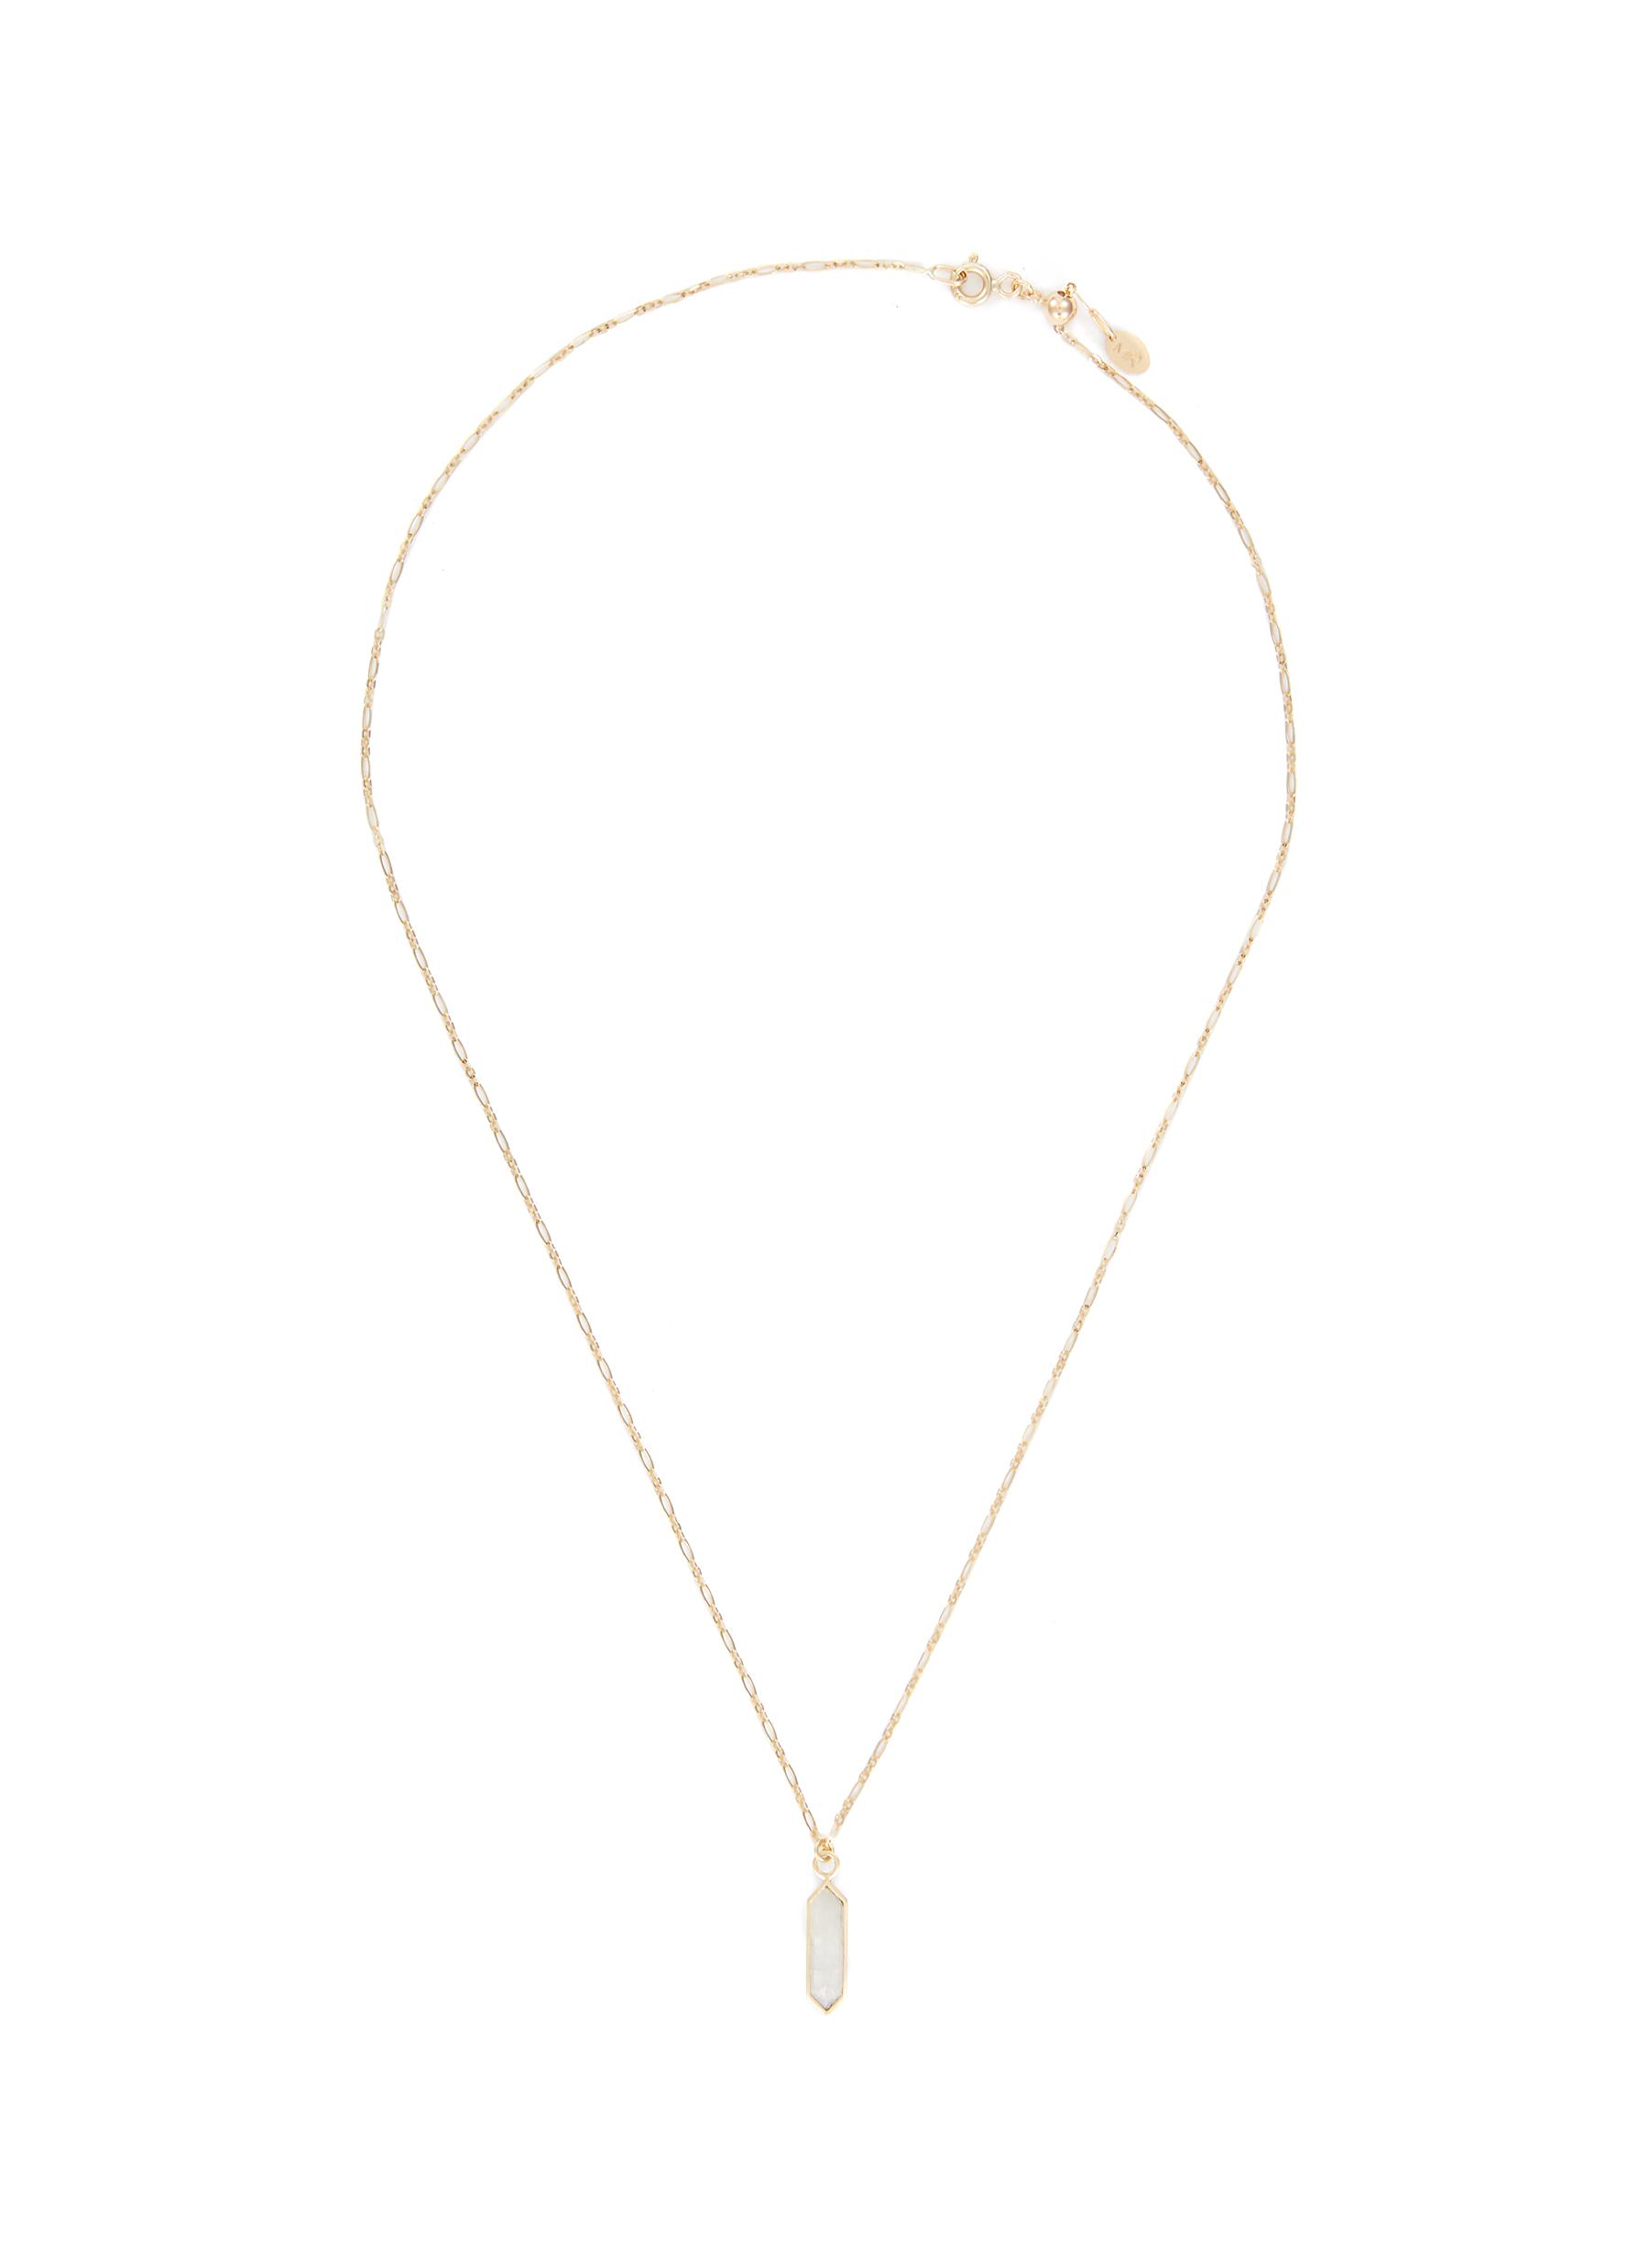 Moonstone 9K Gold Roma Chain Necklace